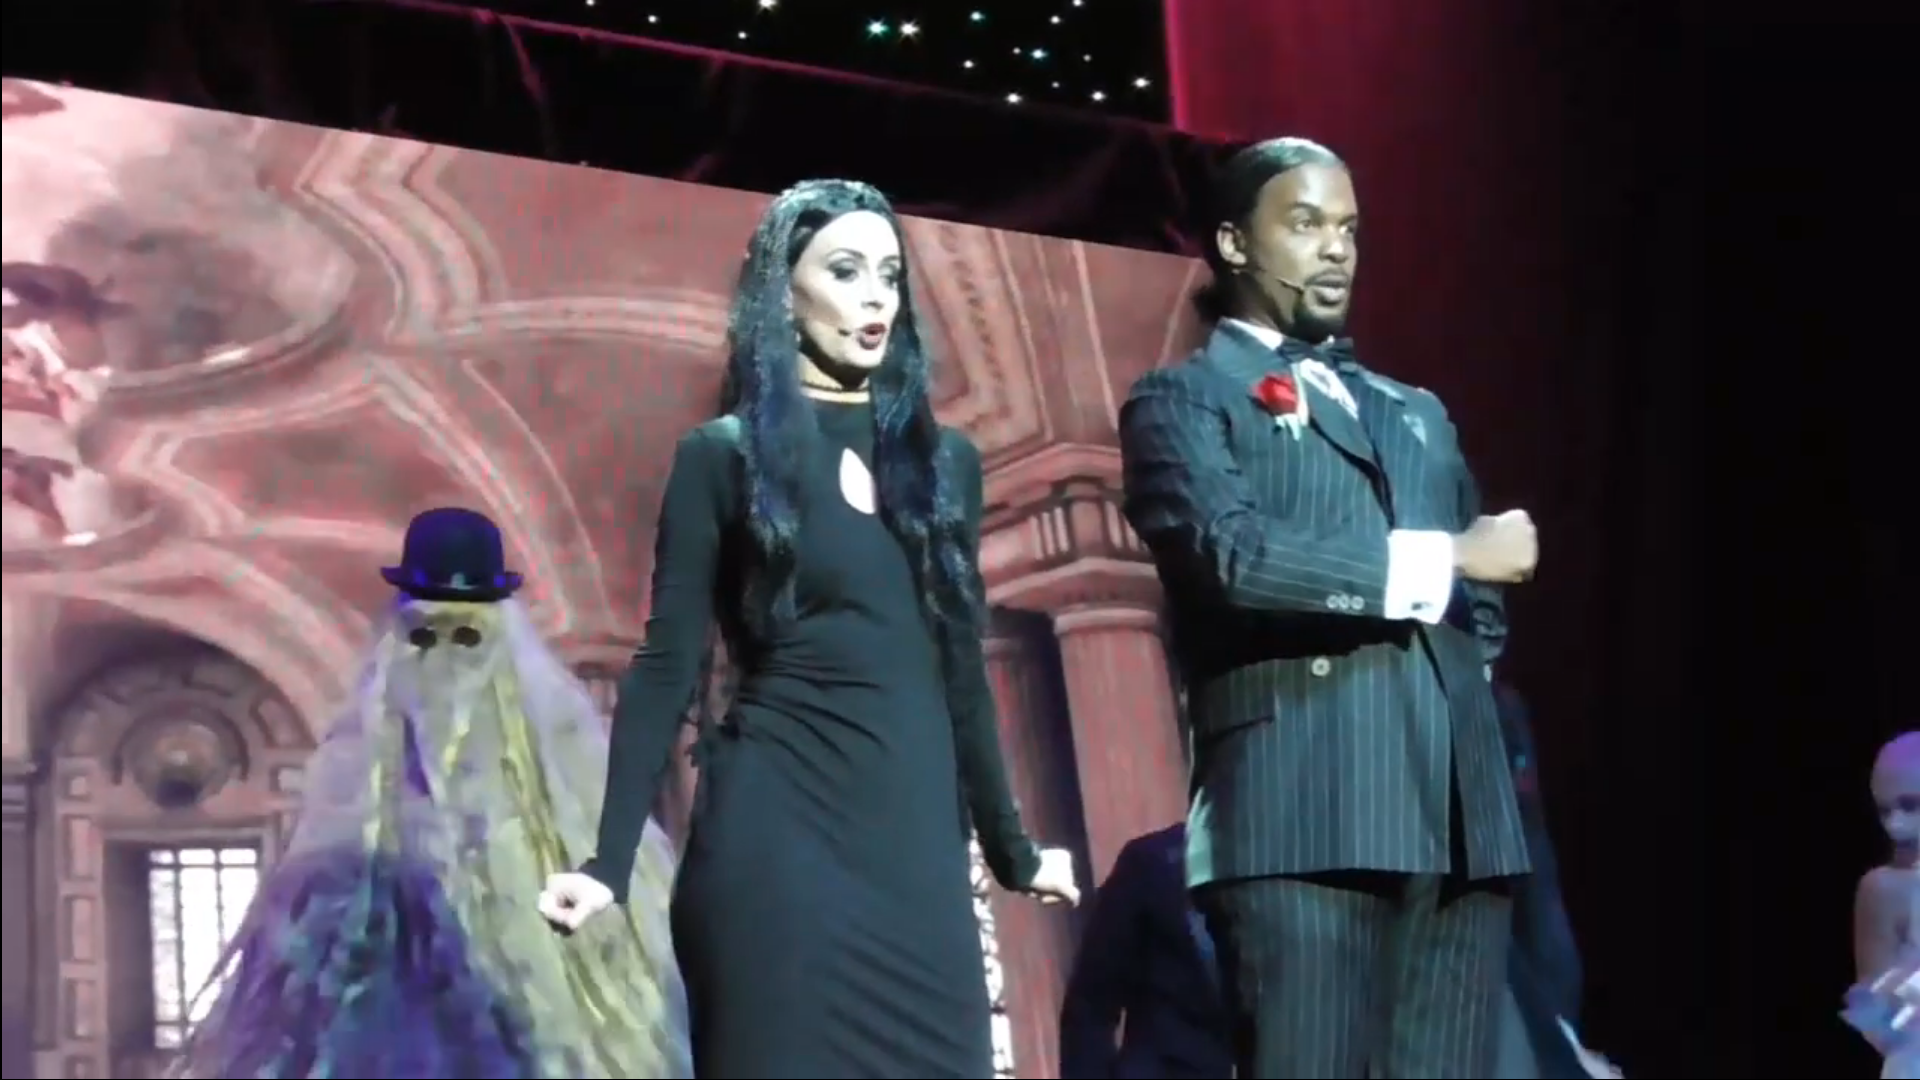 Allie as Morticia in the Addam's Family musical